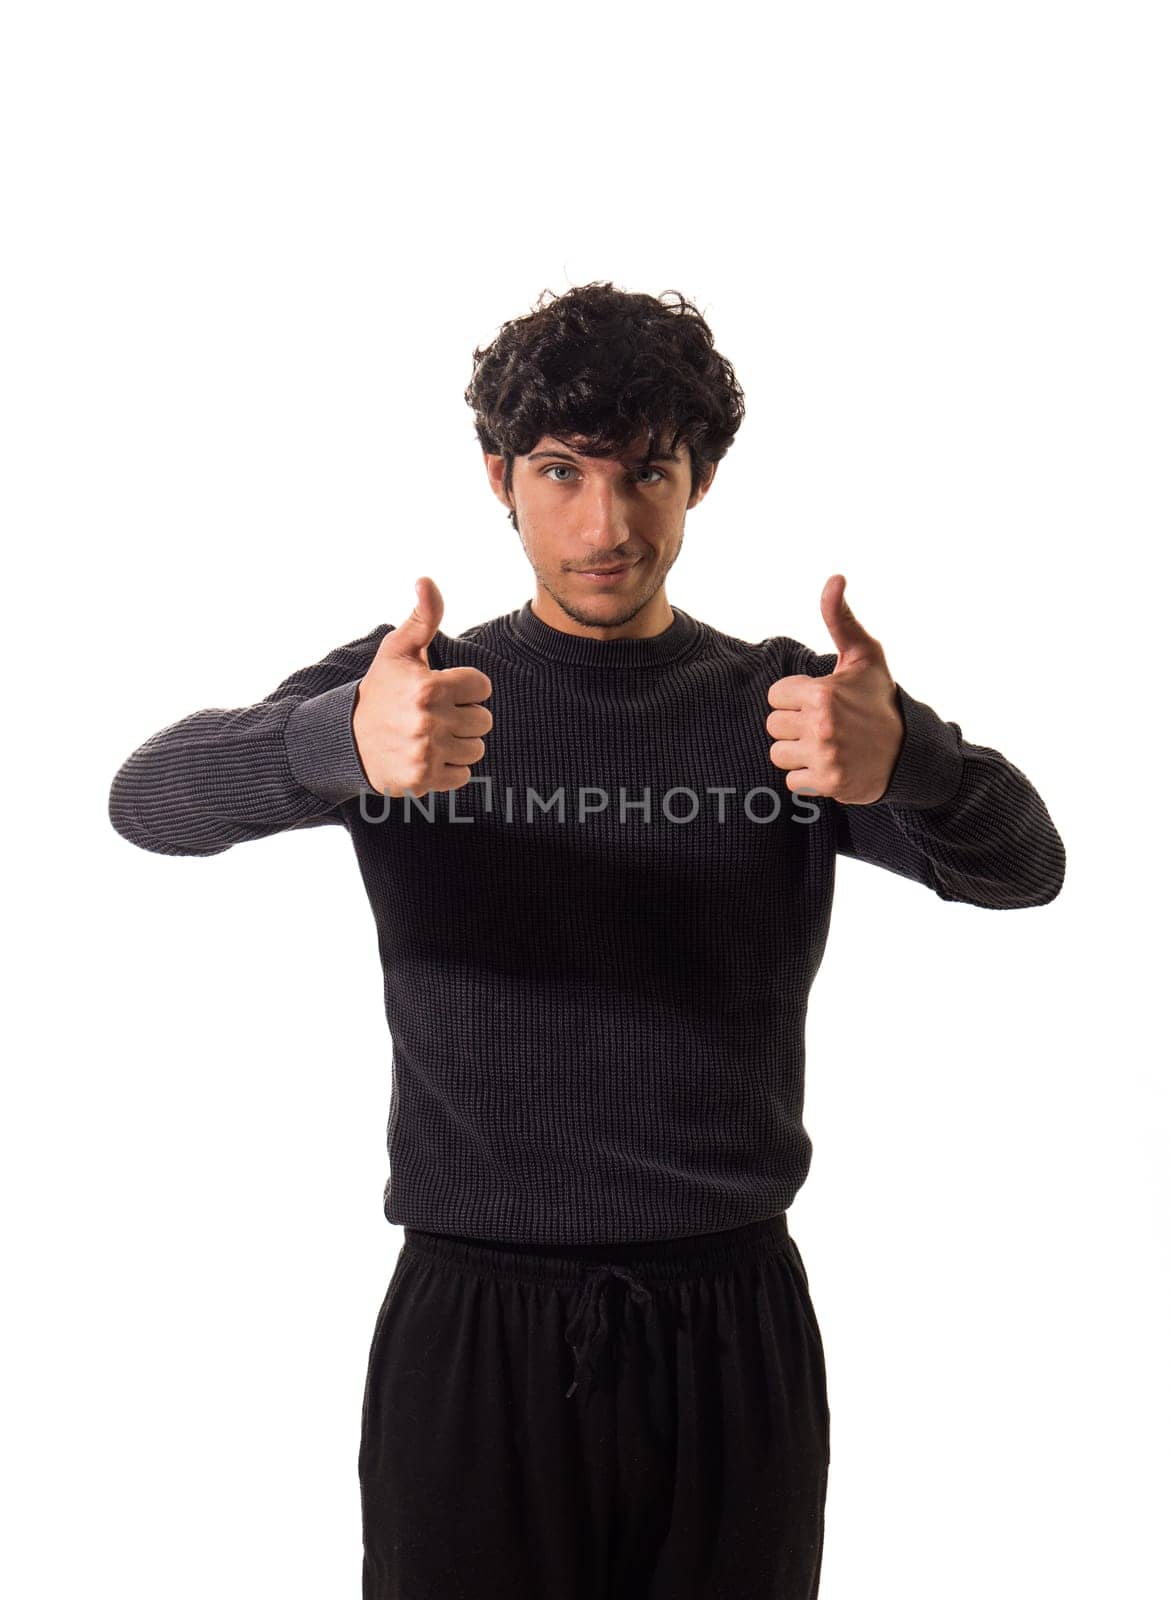 A man in a black sweater giving a thumbs up, in studio shot on neutral background